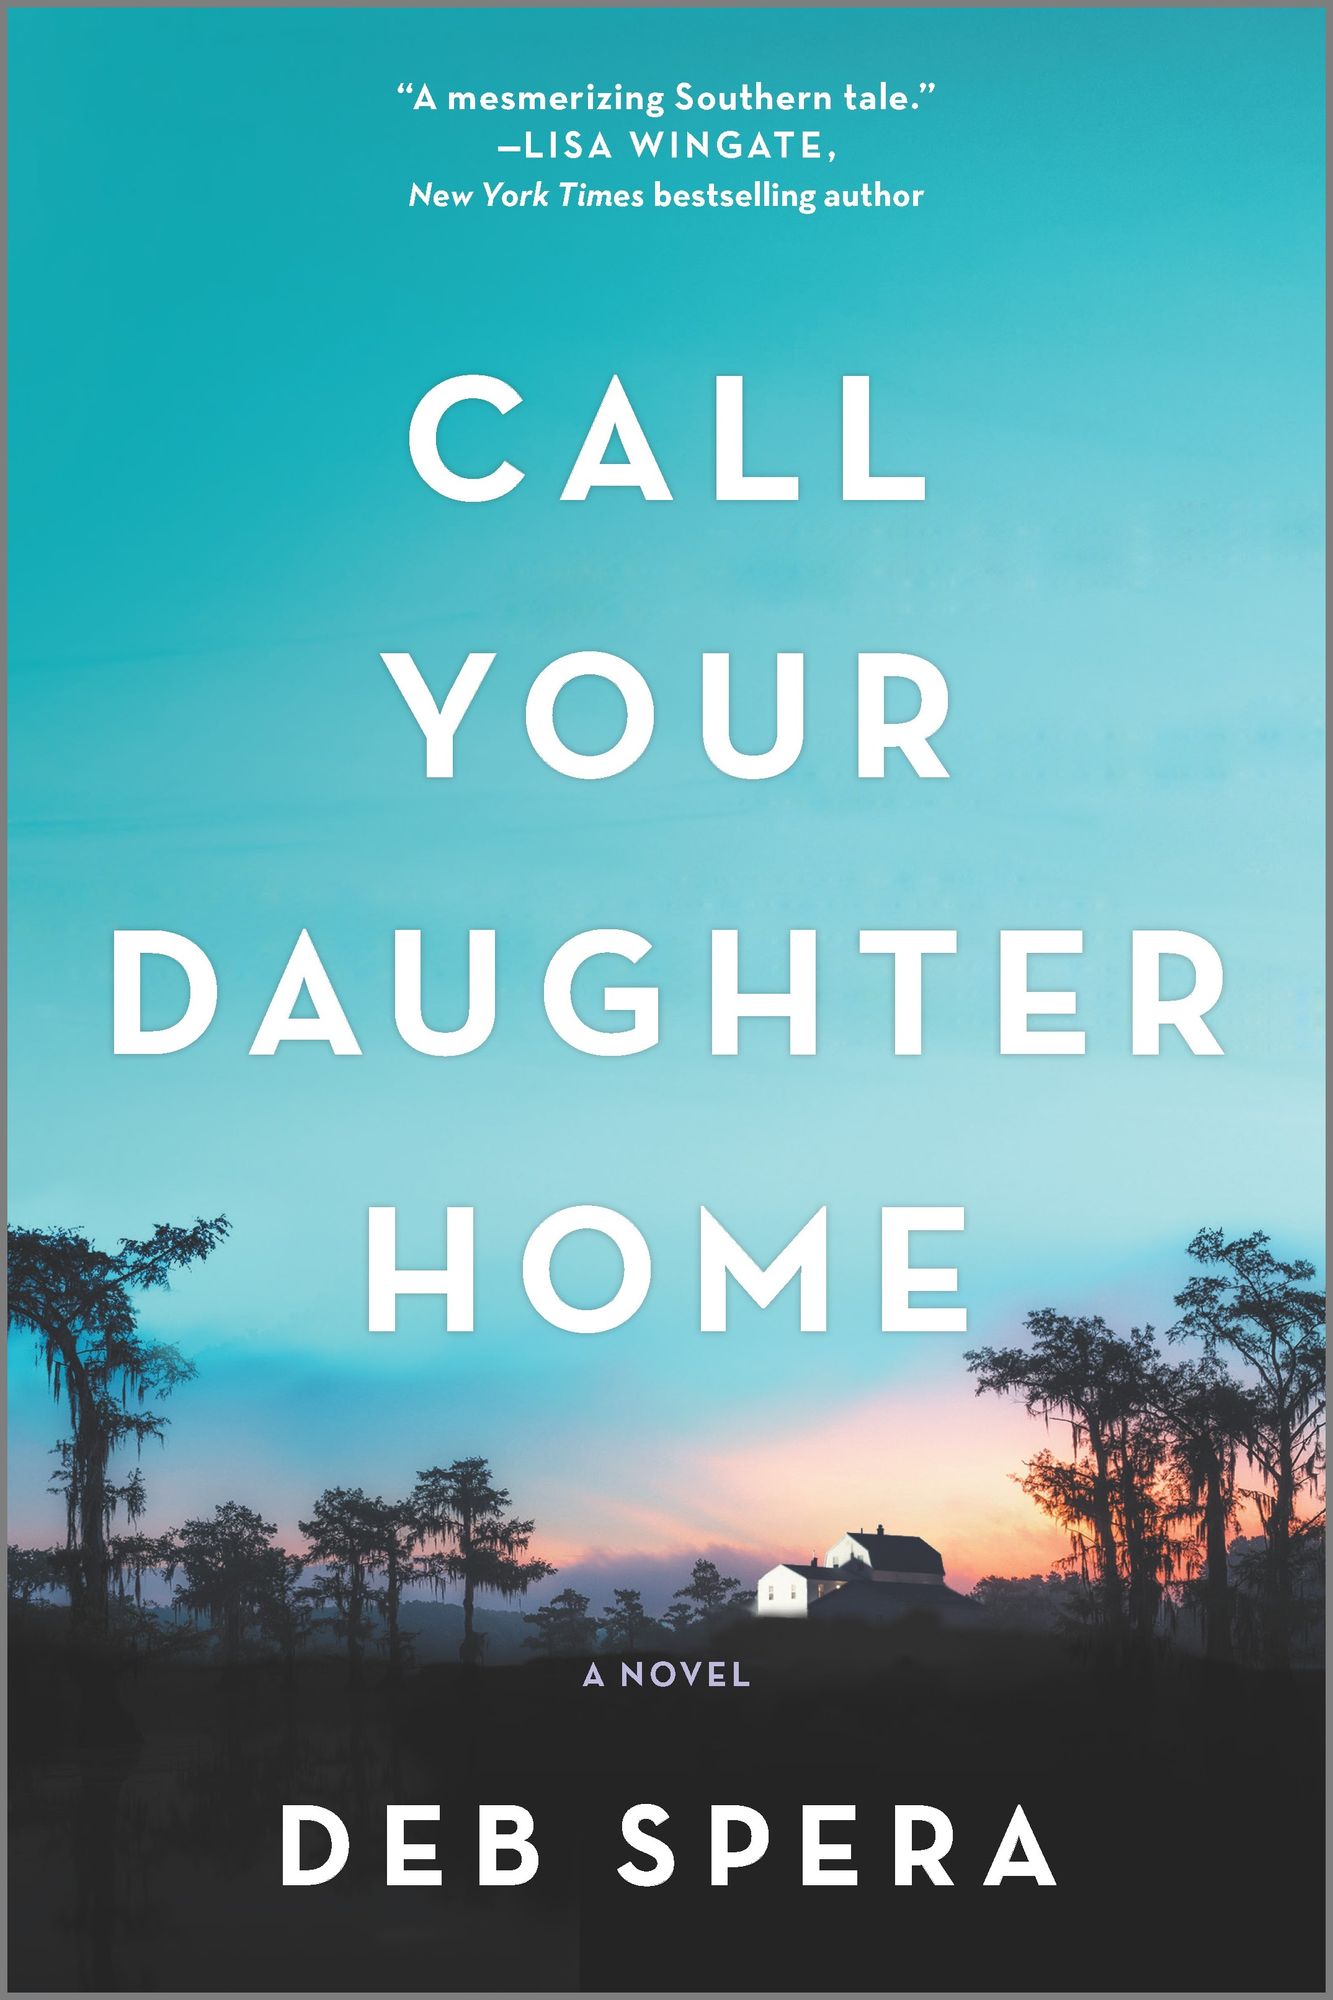 Call Your Daughter Home by Deb Spera